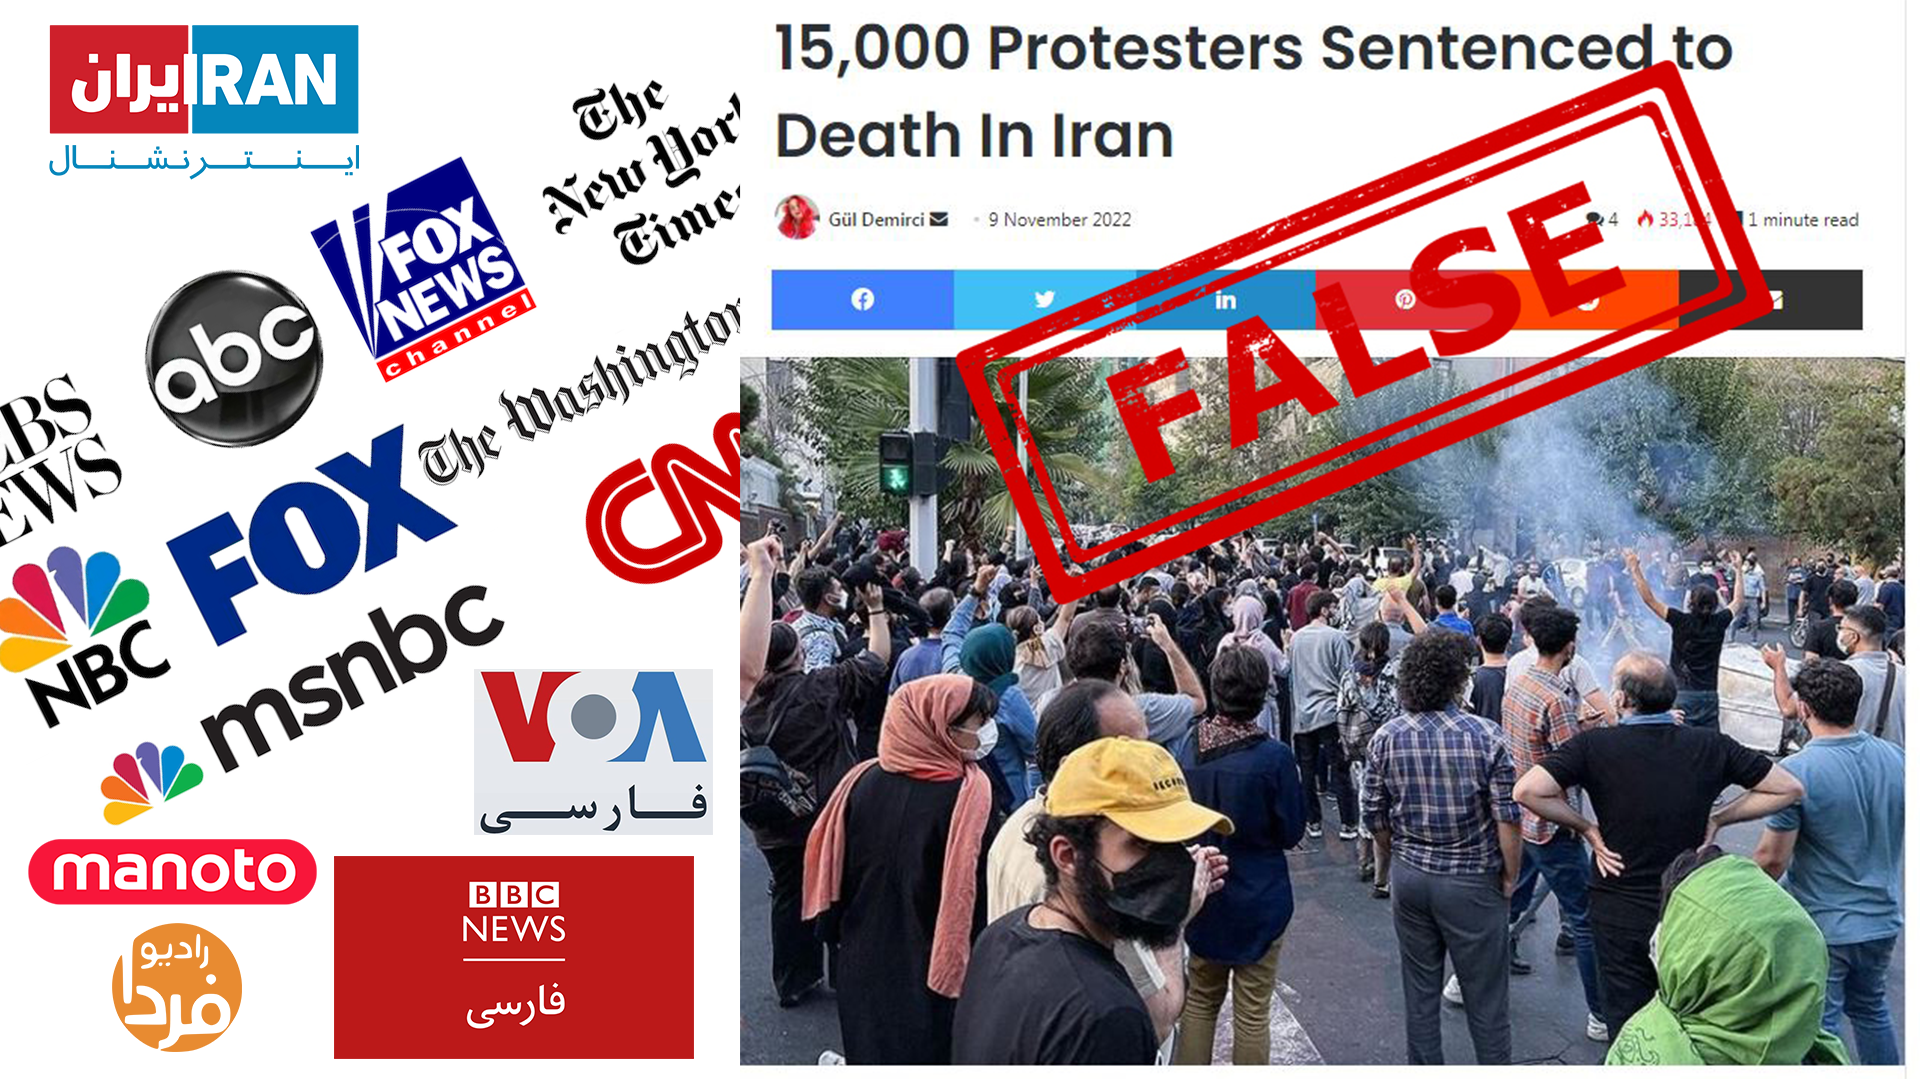 West's nonstop anti-Iran campaign and its recent hilariously fake news on '15,000 executions'!